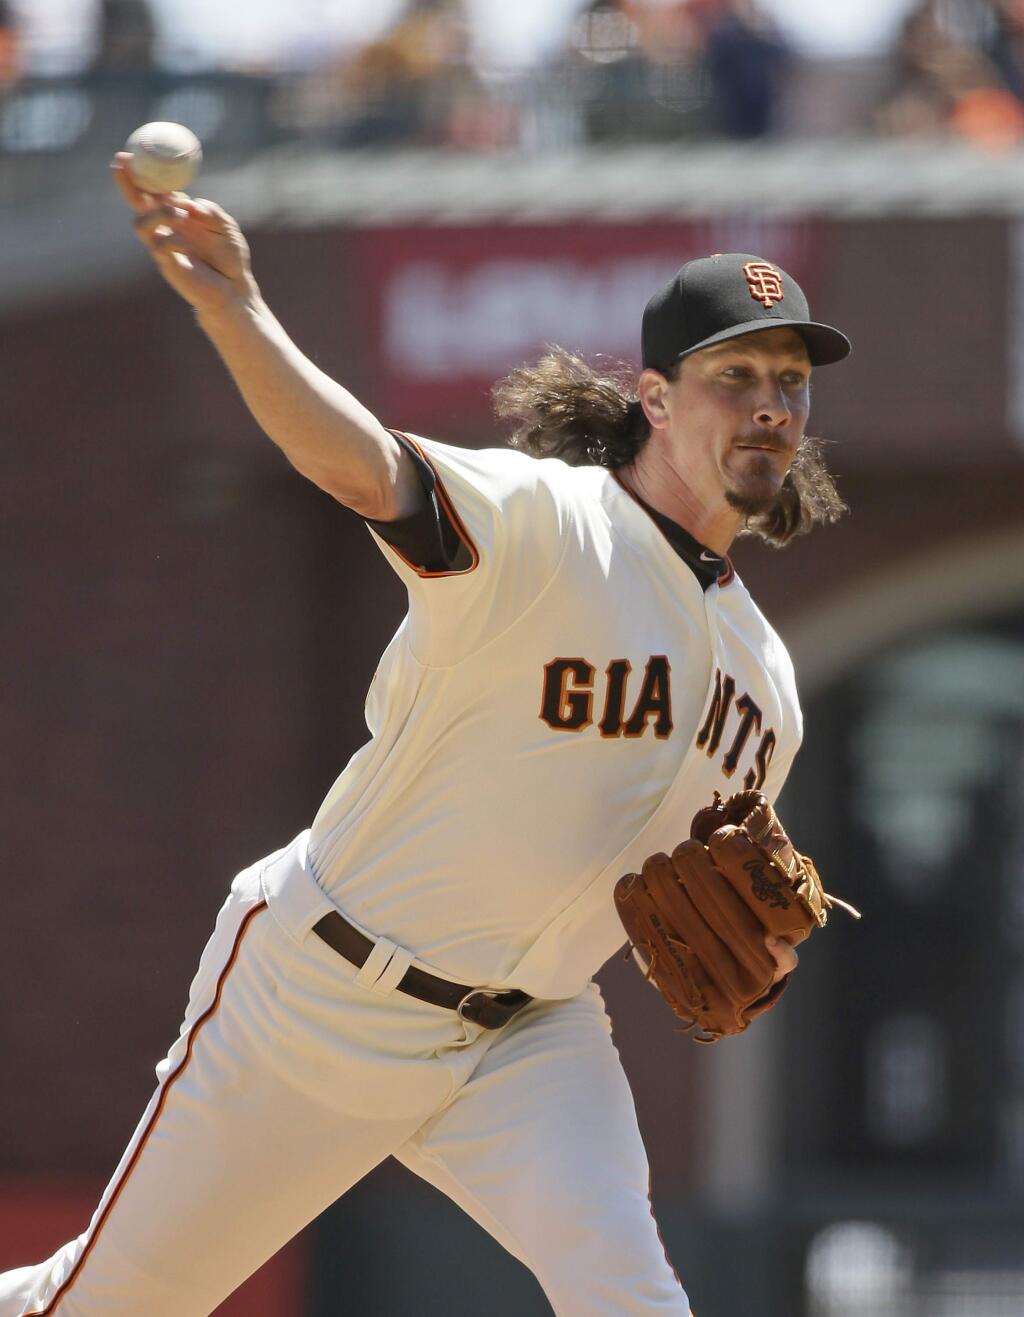 San Francisco Giants starting pitcher Jeff Samardzija works in the first inning against the Pittsburgh Pirates Wednesday, July 26, 2017, in San Francisco. (AP Photo/Eric Risberg)